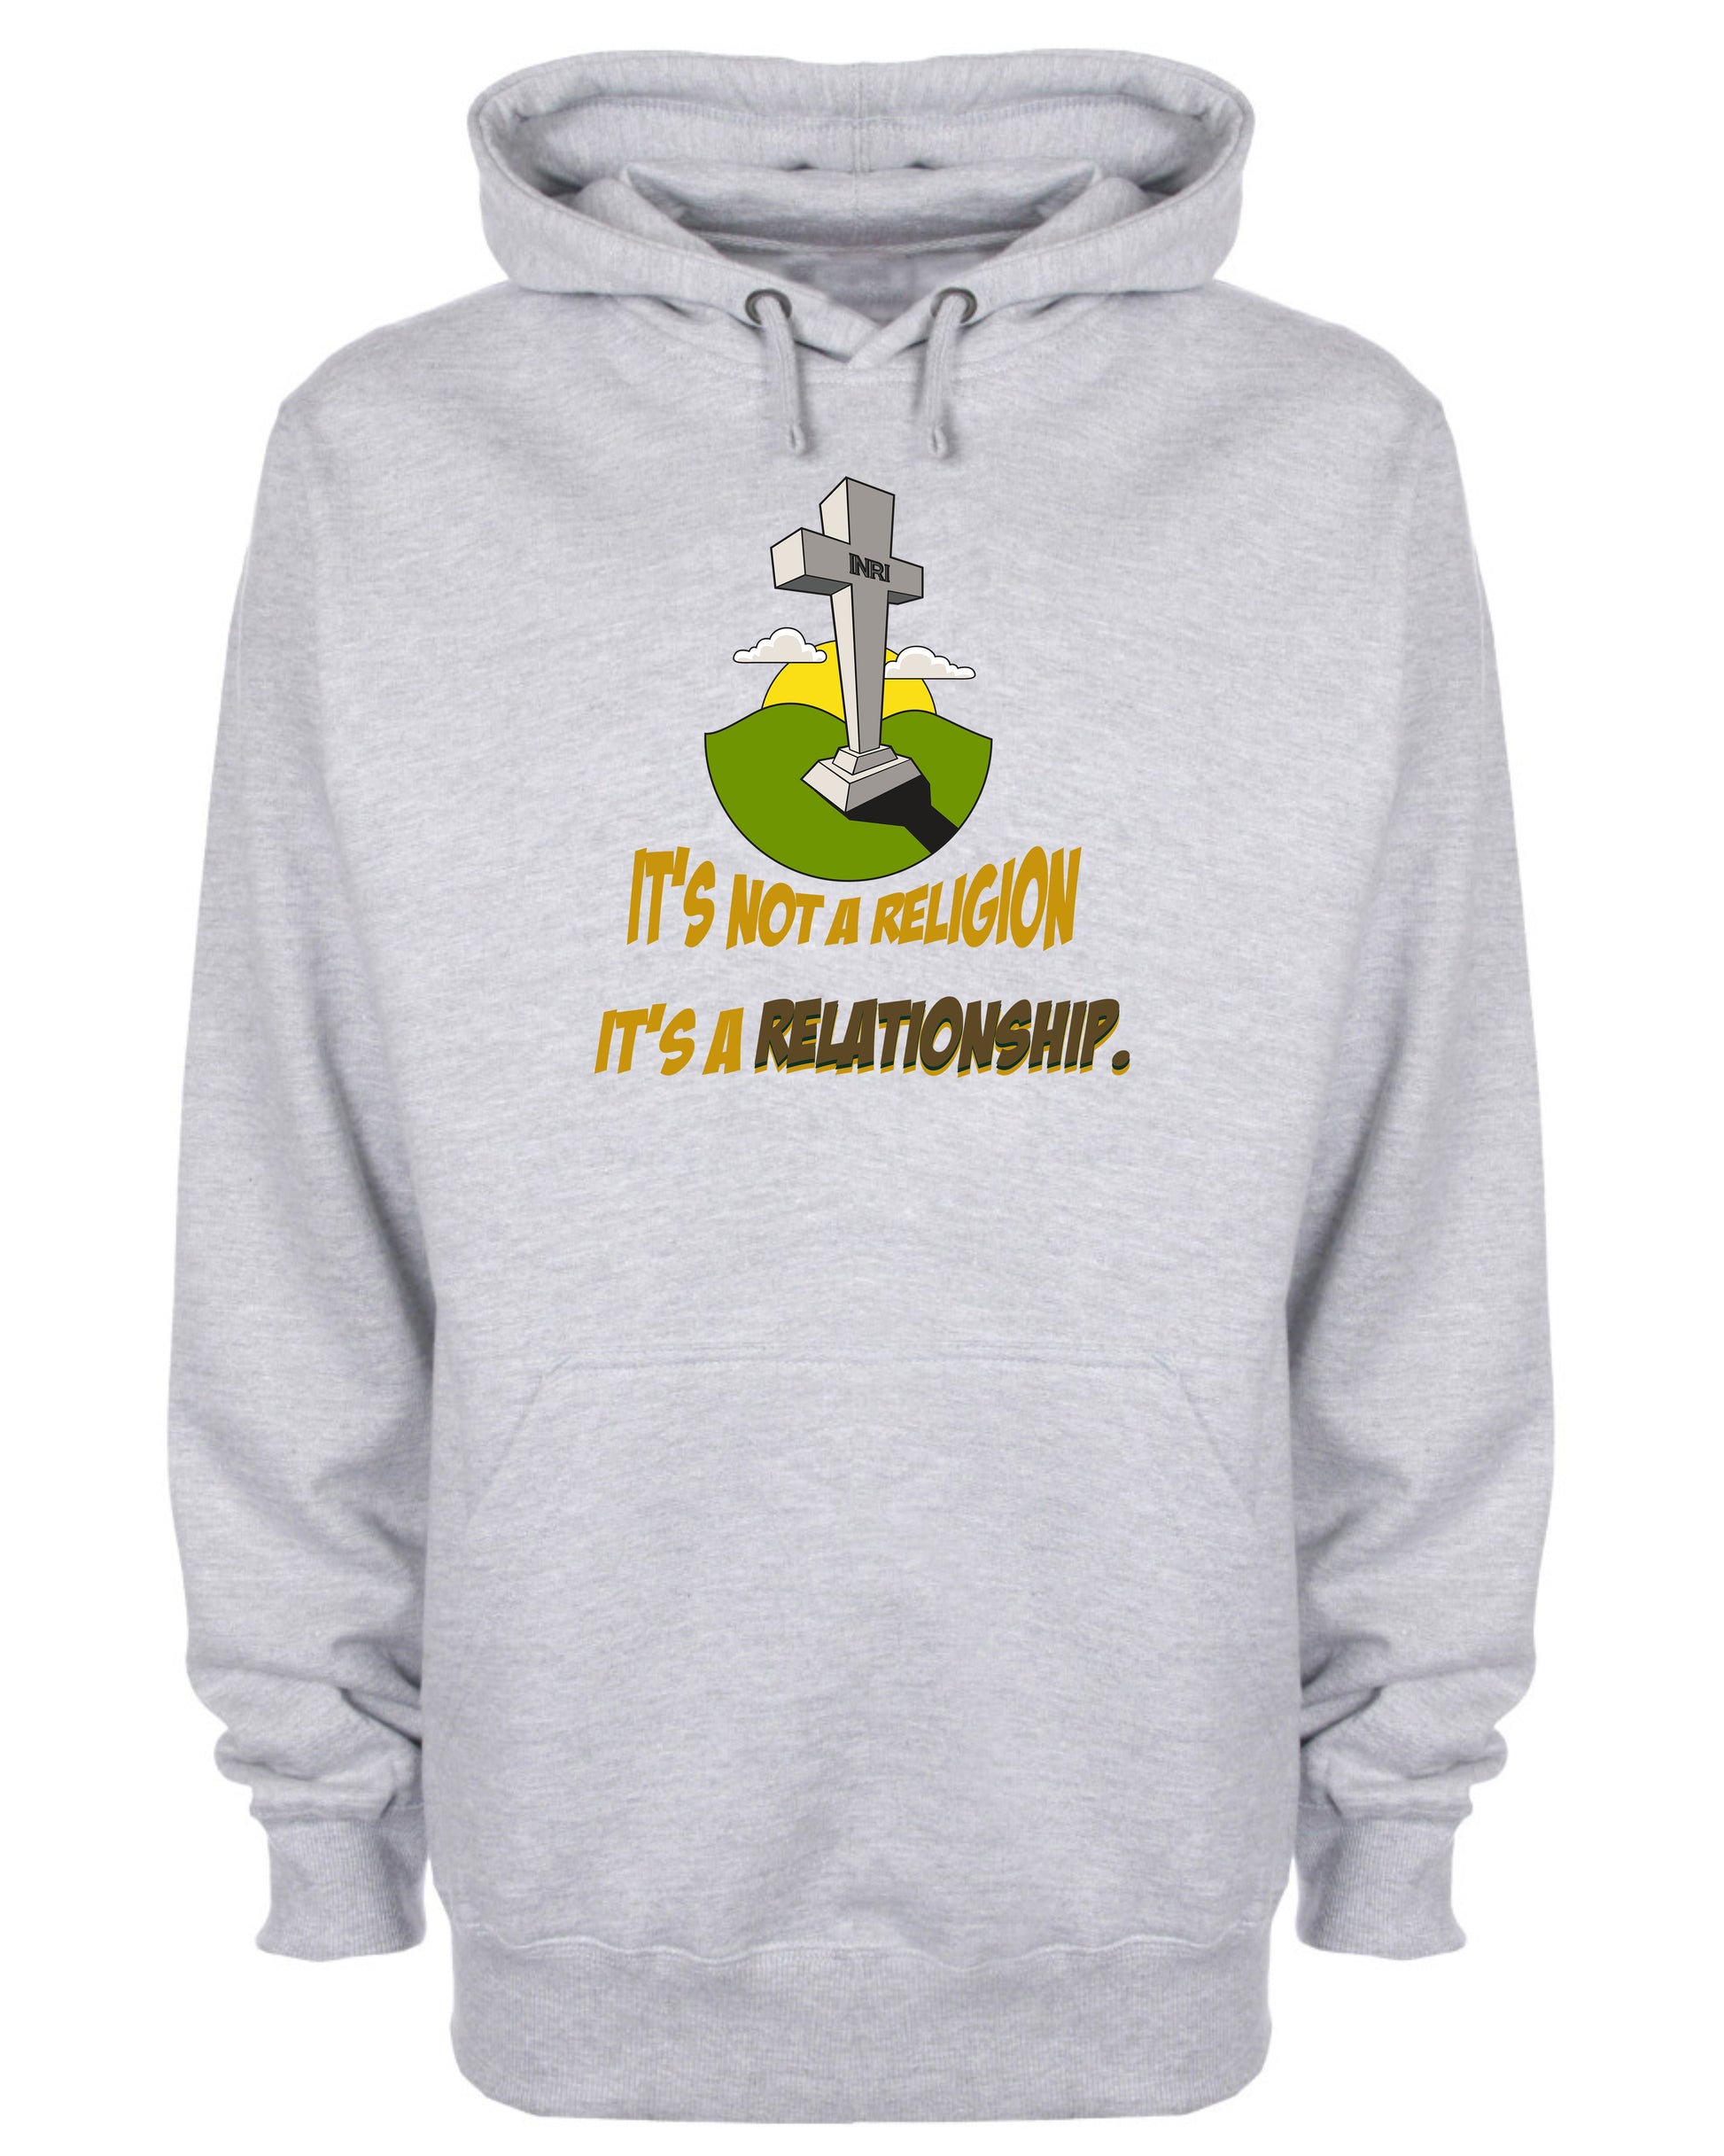 It's Not A Religion It's A Relationship Christian Sweatshirt